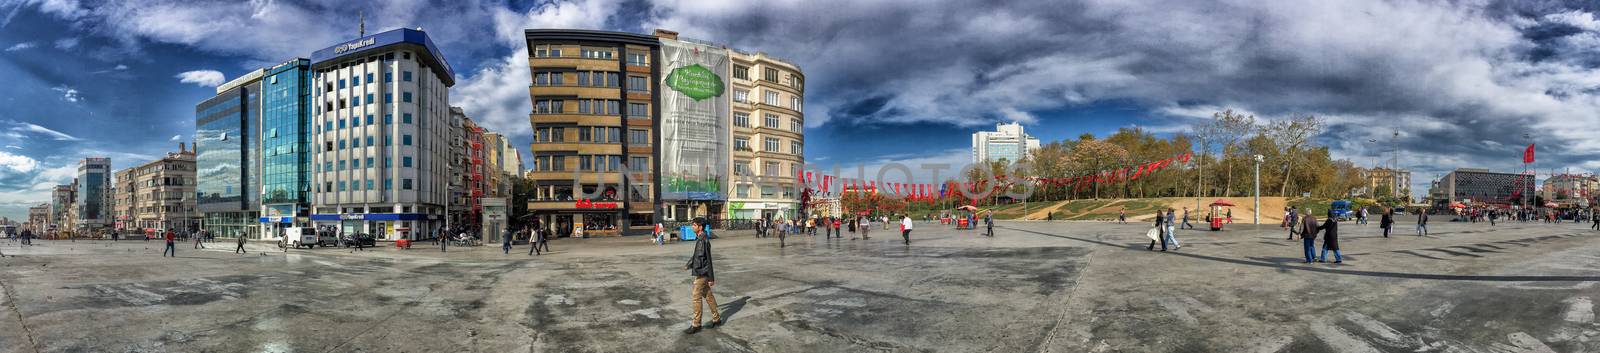 ISTANBUL, TURKEY - OCTOBER 23, 2014: People walking at Taksim Square in Istanbul. Taksim Square is a leisure district famous for its restaurants, shops, and hotels.